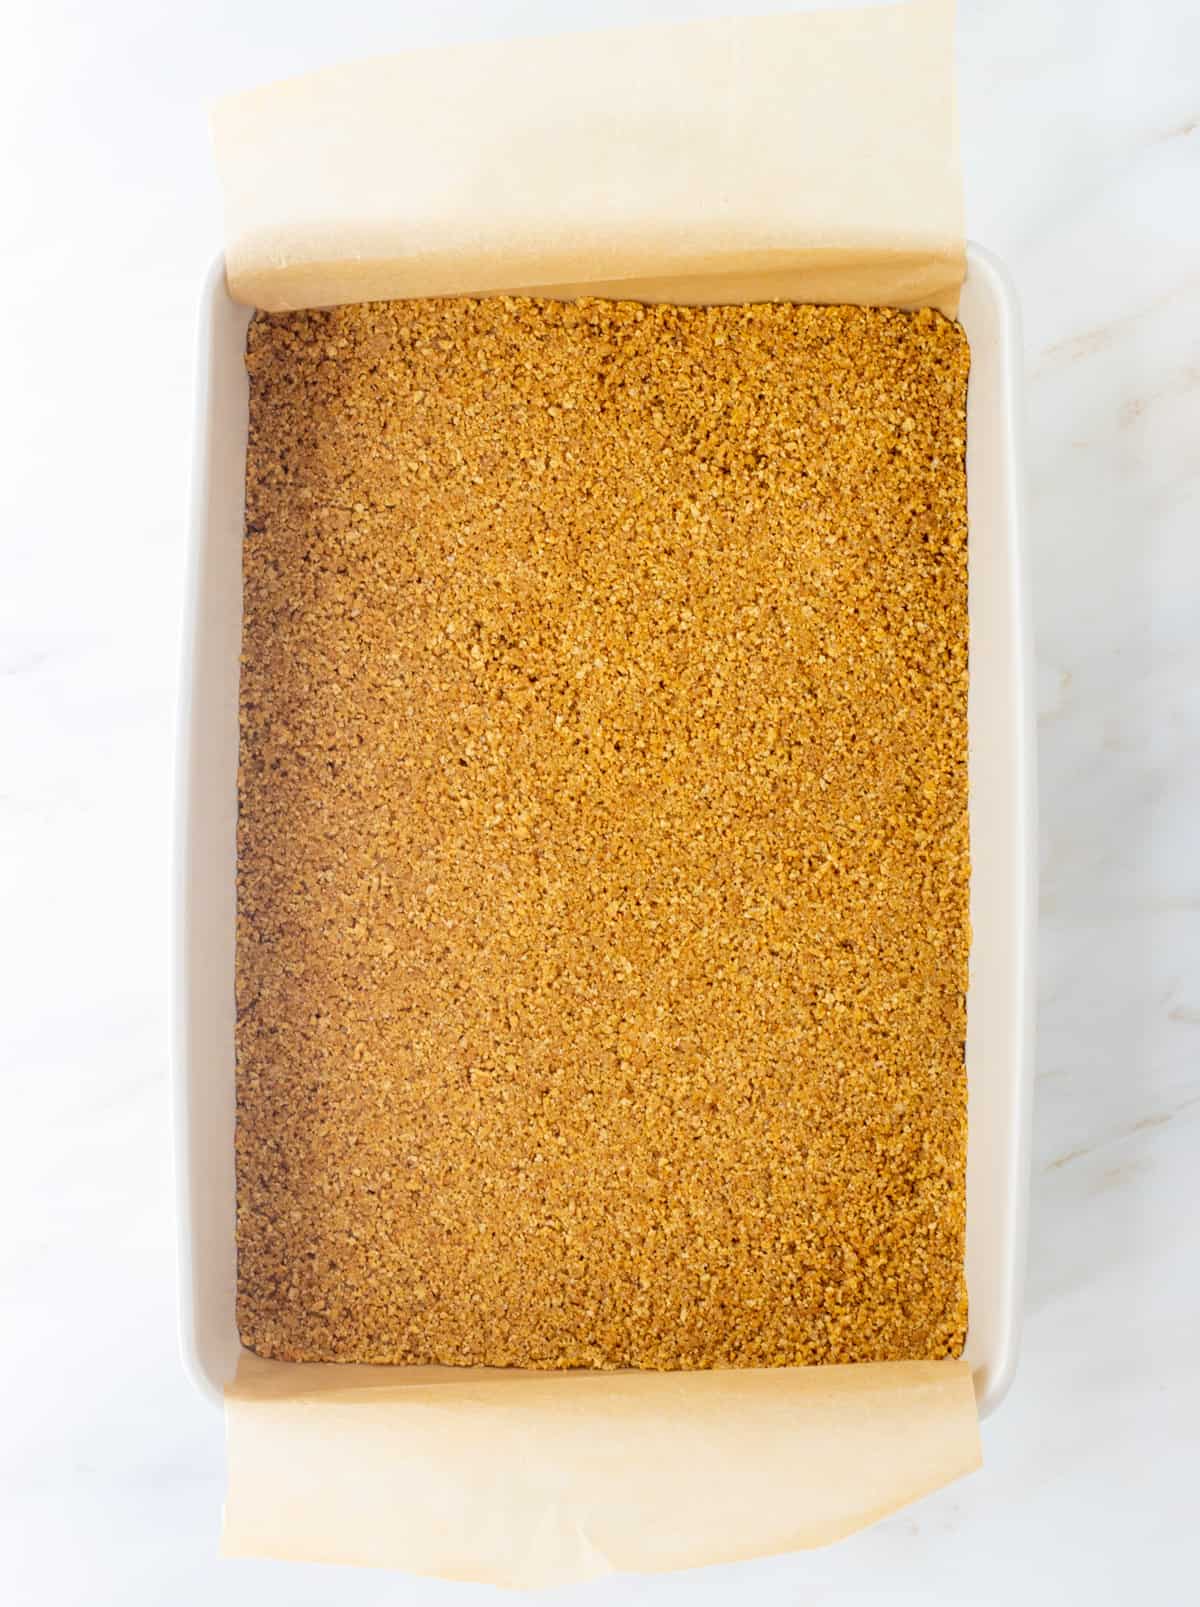 Graham cracker crust pressed into a parchment lined baking dish.